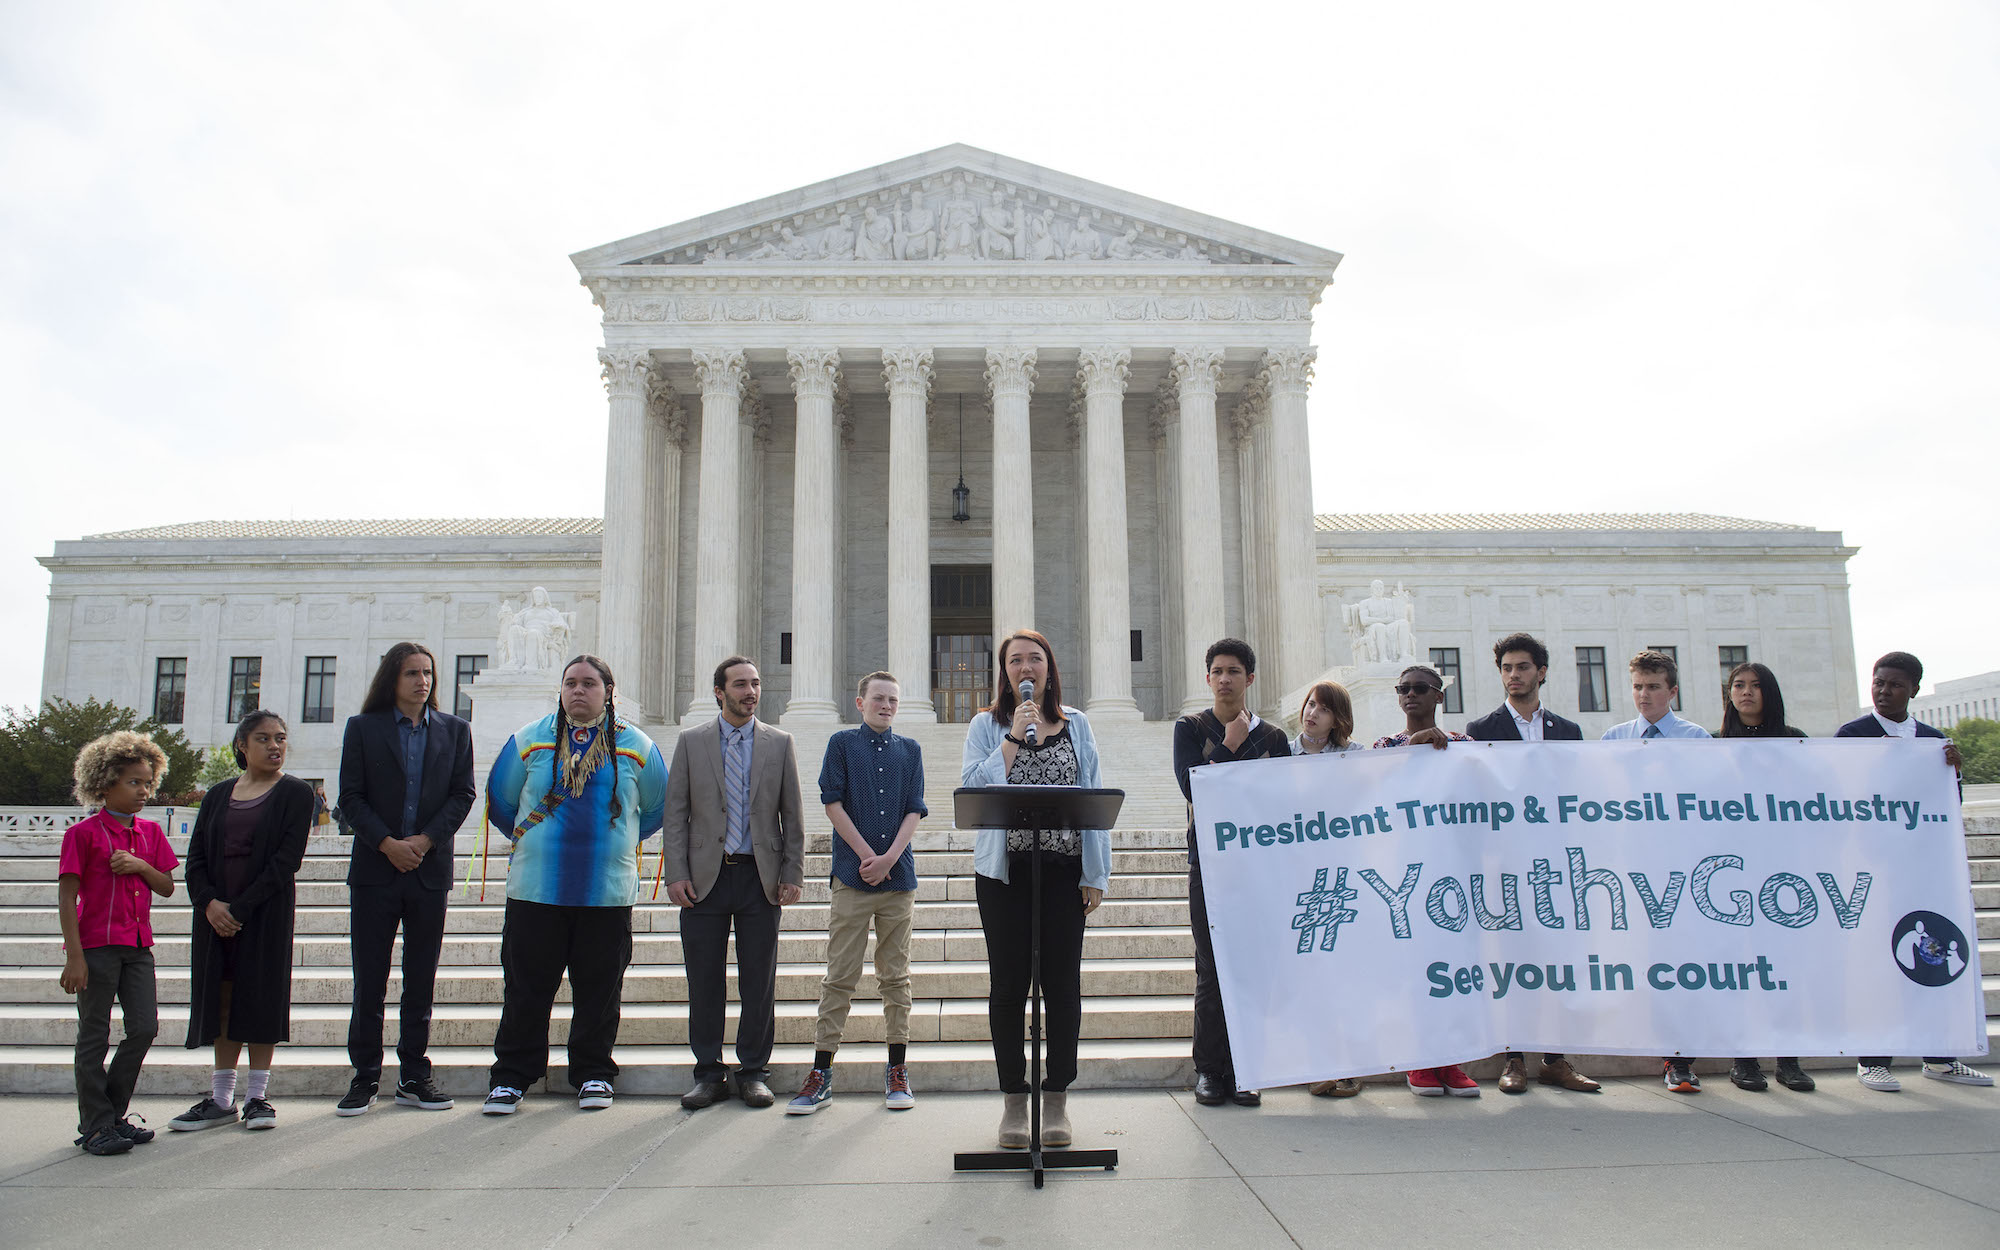 Youth plaintiff Kelsey Juliana speaks during a press conference in front of the U.S. Supreme Court in Washington, flanked by co-plaintiffs in their climate suit against the federal government.